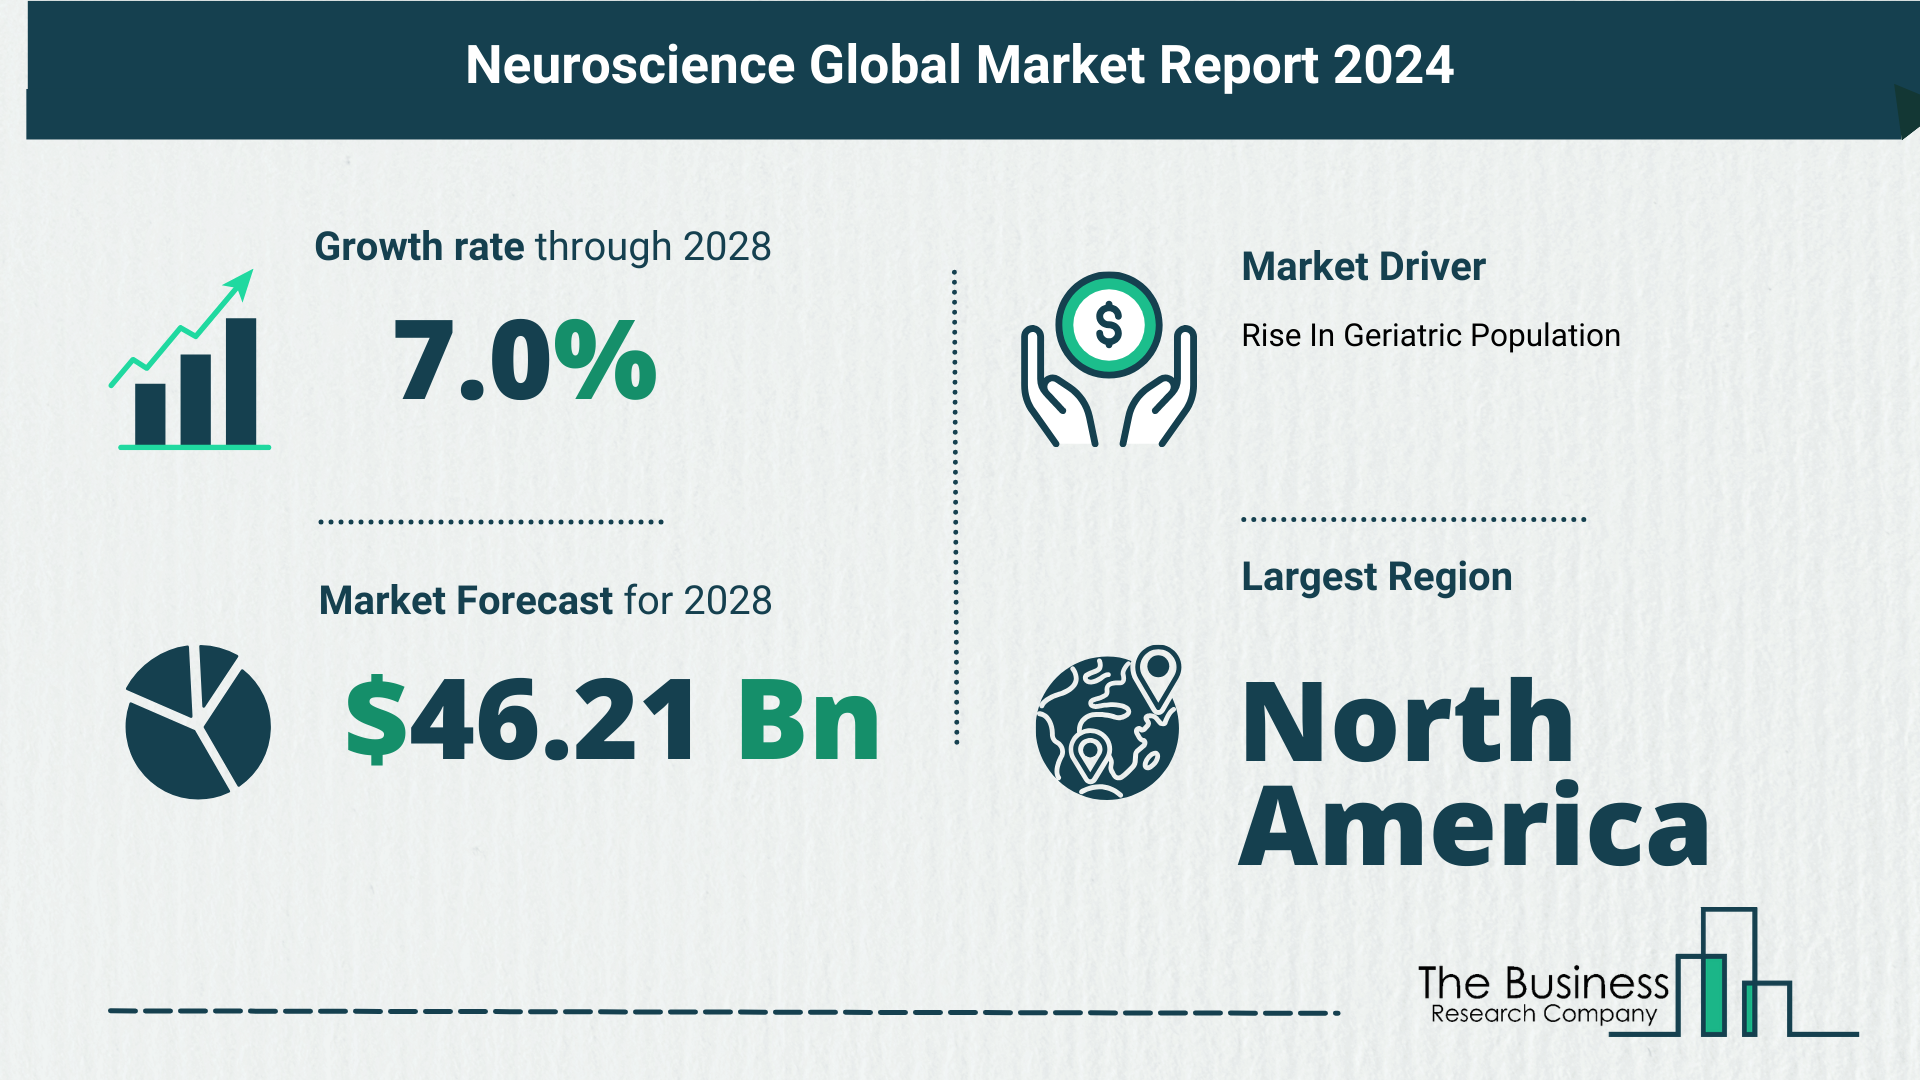 How Is The Neuroscience Market Expected To Grow Through 2024-2033